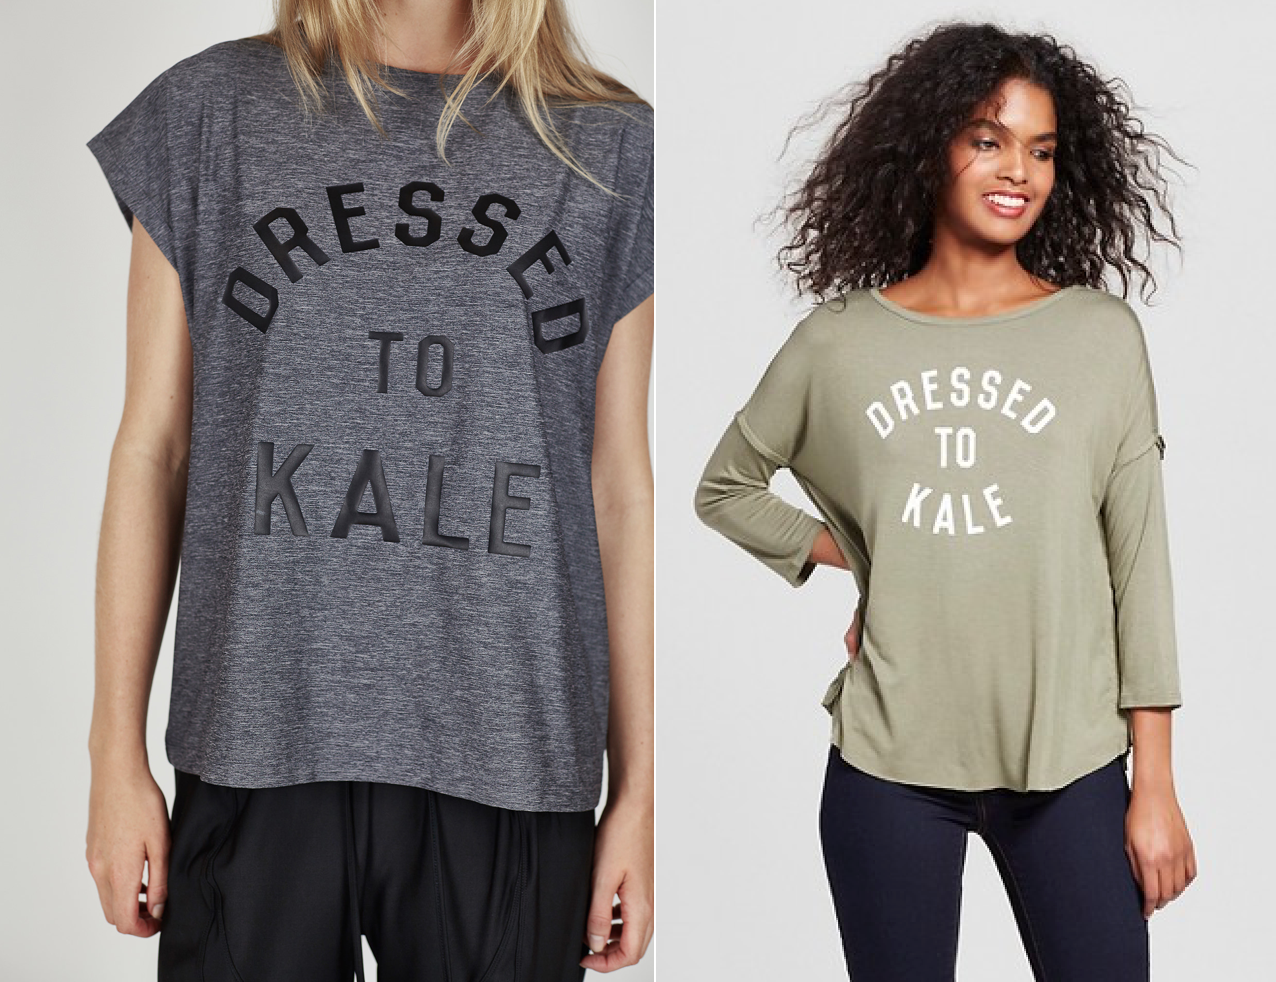  Charlie Cohen's tee (left) & Target's version (right) 